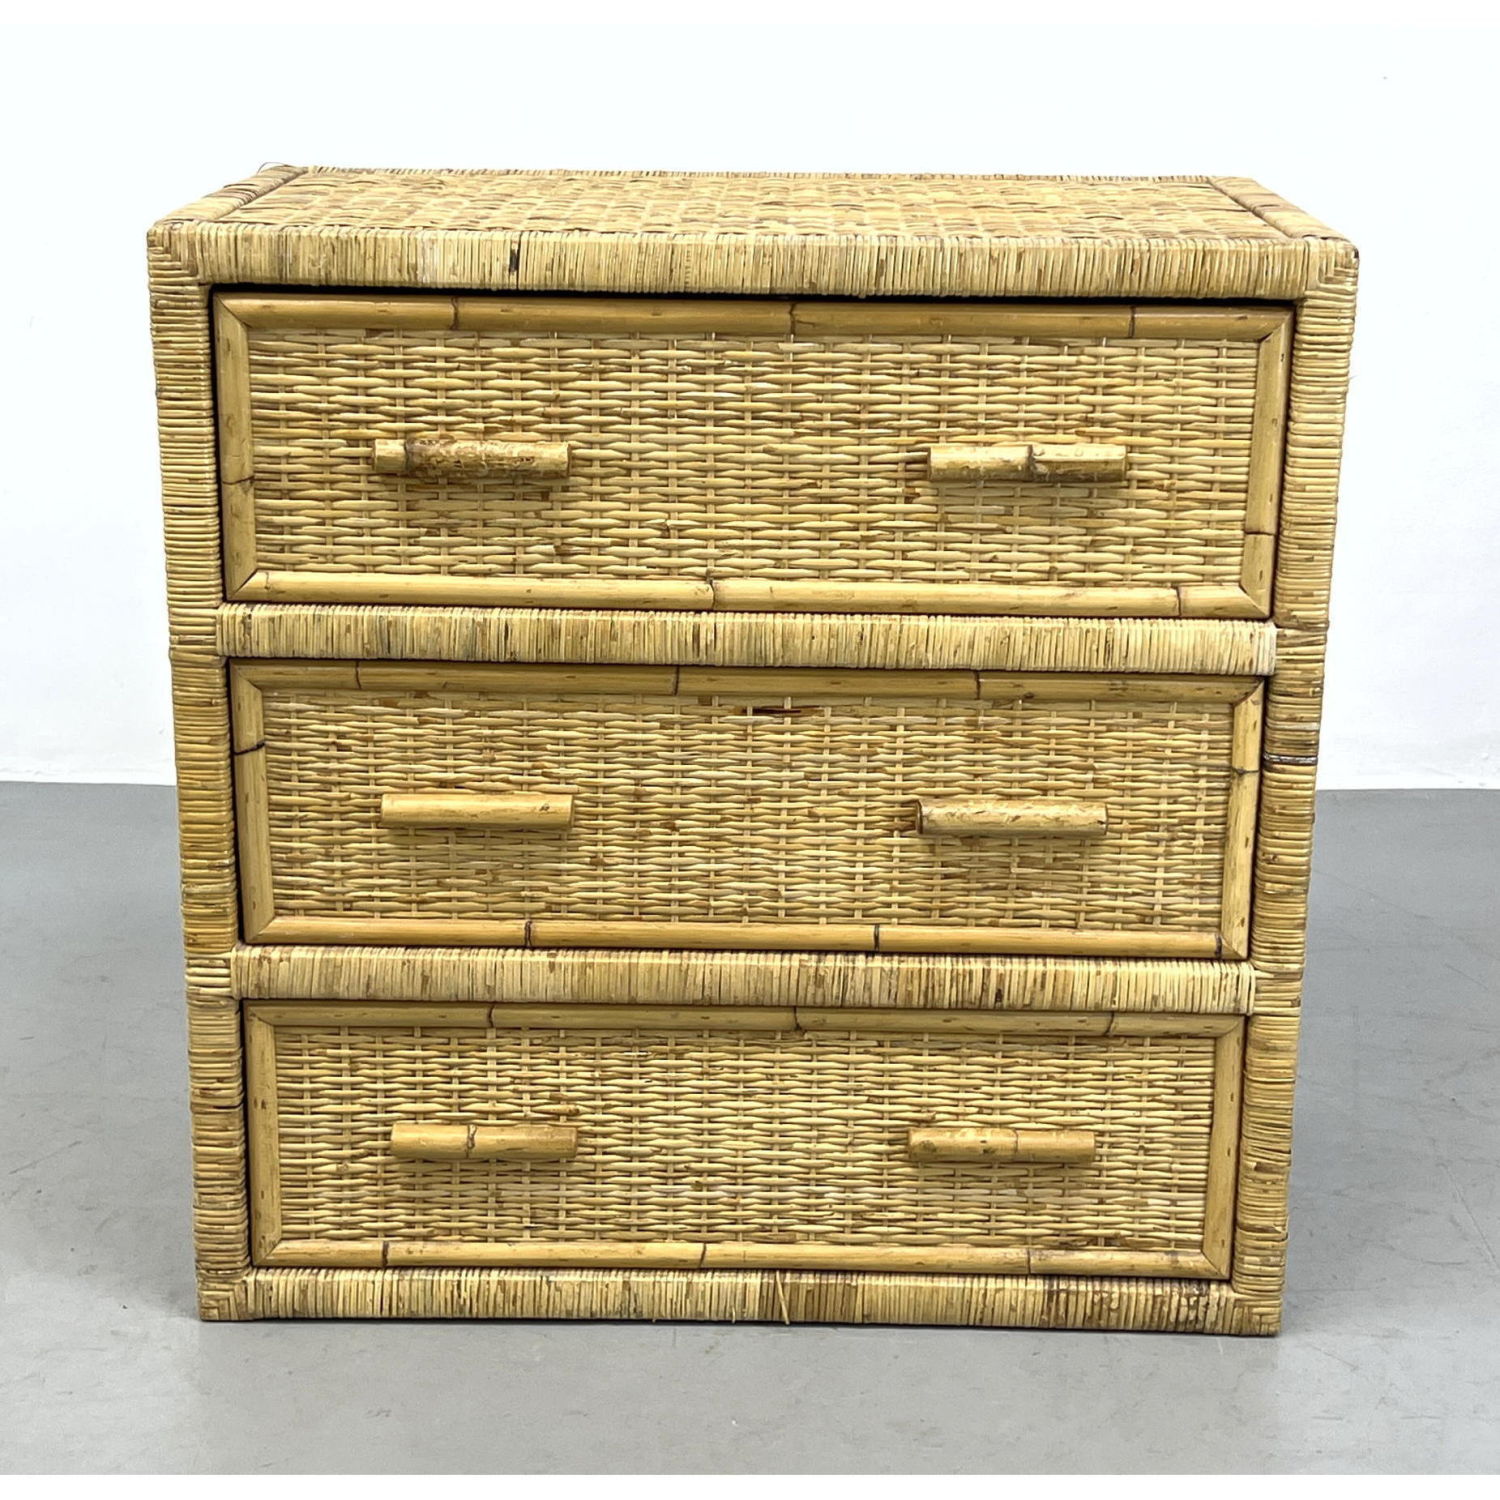 Wicker Bamboo bachelor's chest